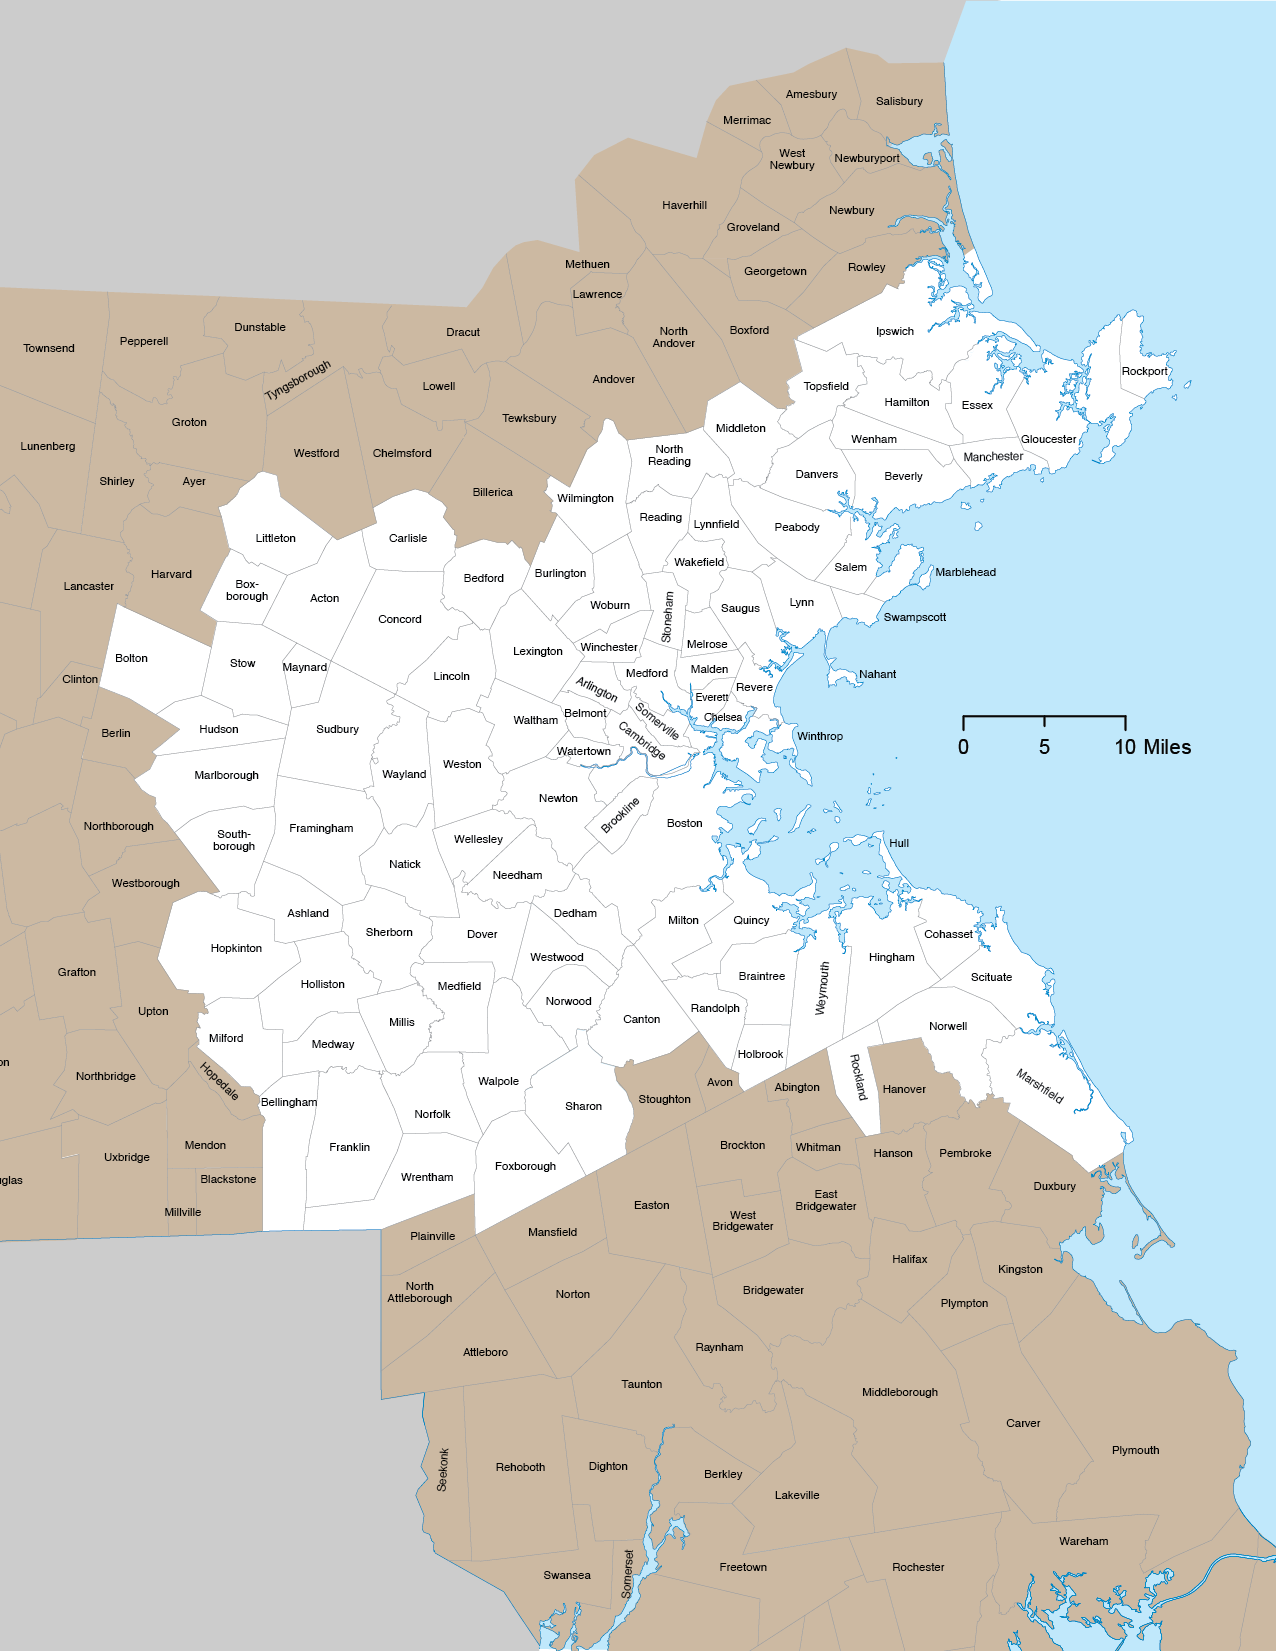 Figure 1-1 is a map that shows the physical reach of the Boston Region MPO area. It indicates that the MPO’s jurisdiction extends from Boston north to Ipswich, south to Marshfield, and west to Interstate 495. The map shows the 97 cities and towns that make up the MPO area. 